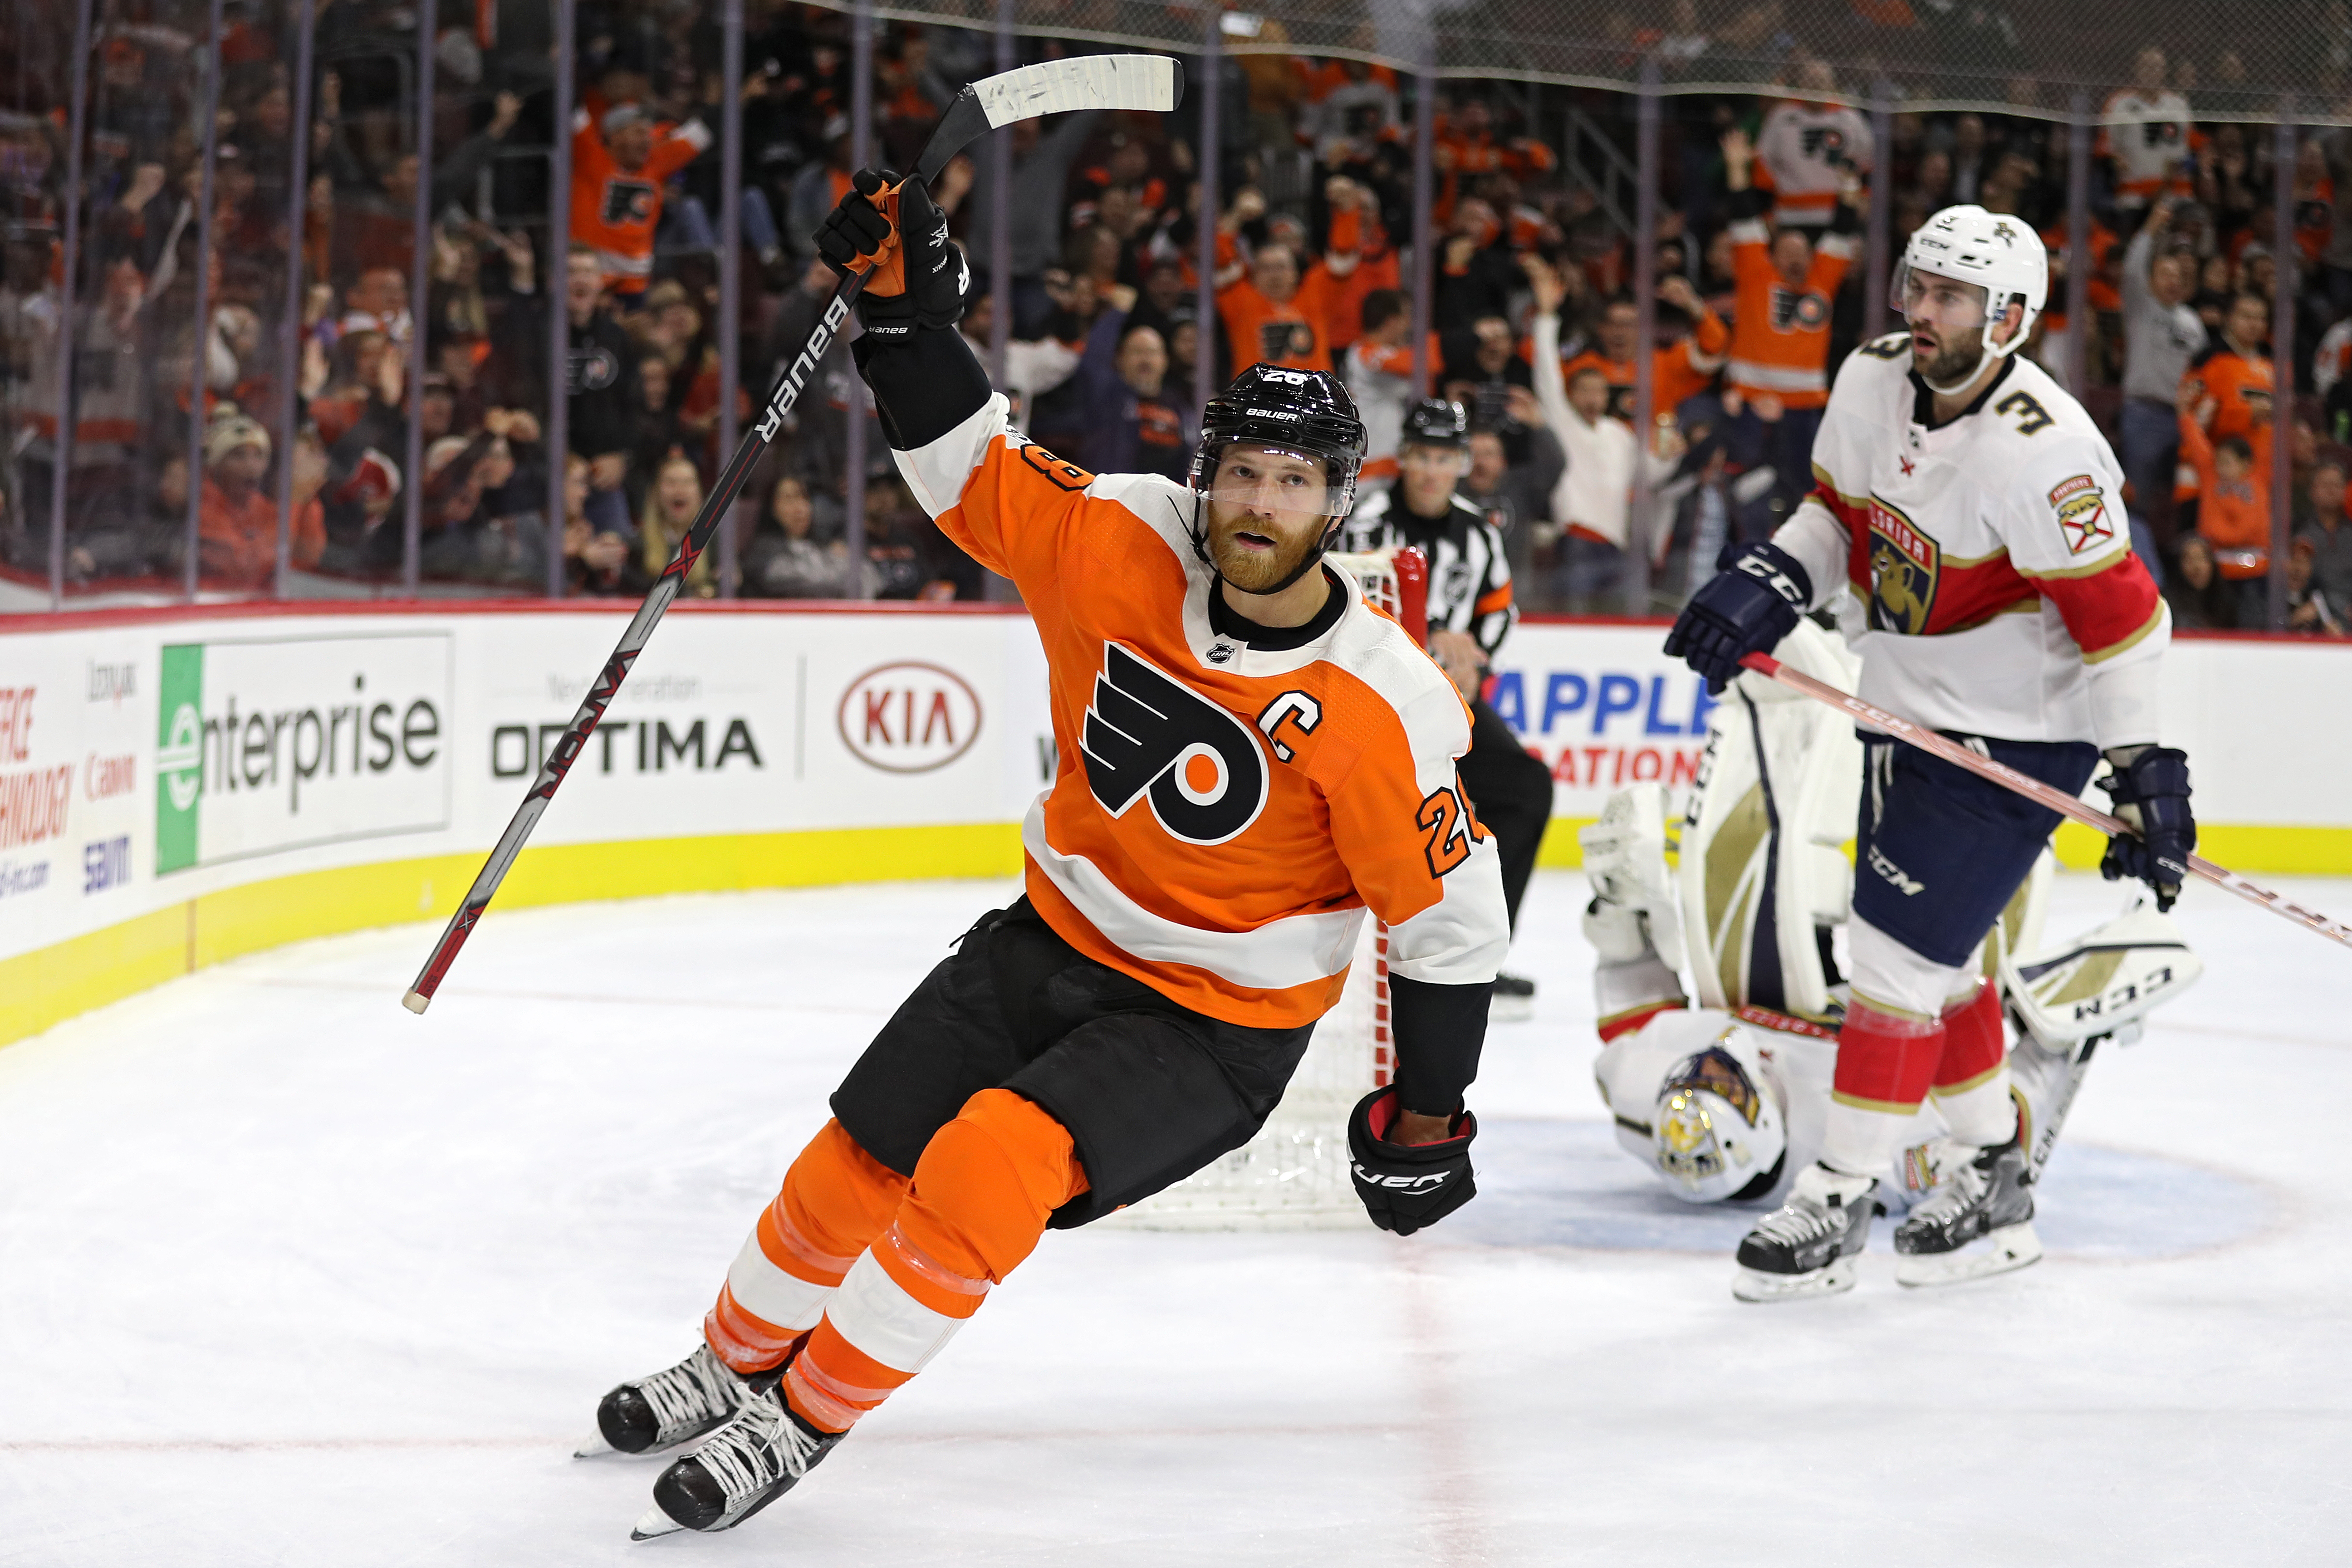 Flyers Are Victims As Claude Giroux Scores 300th Career Goal